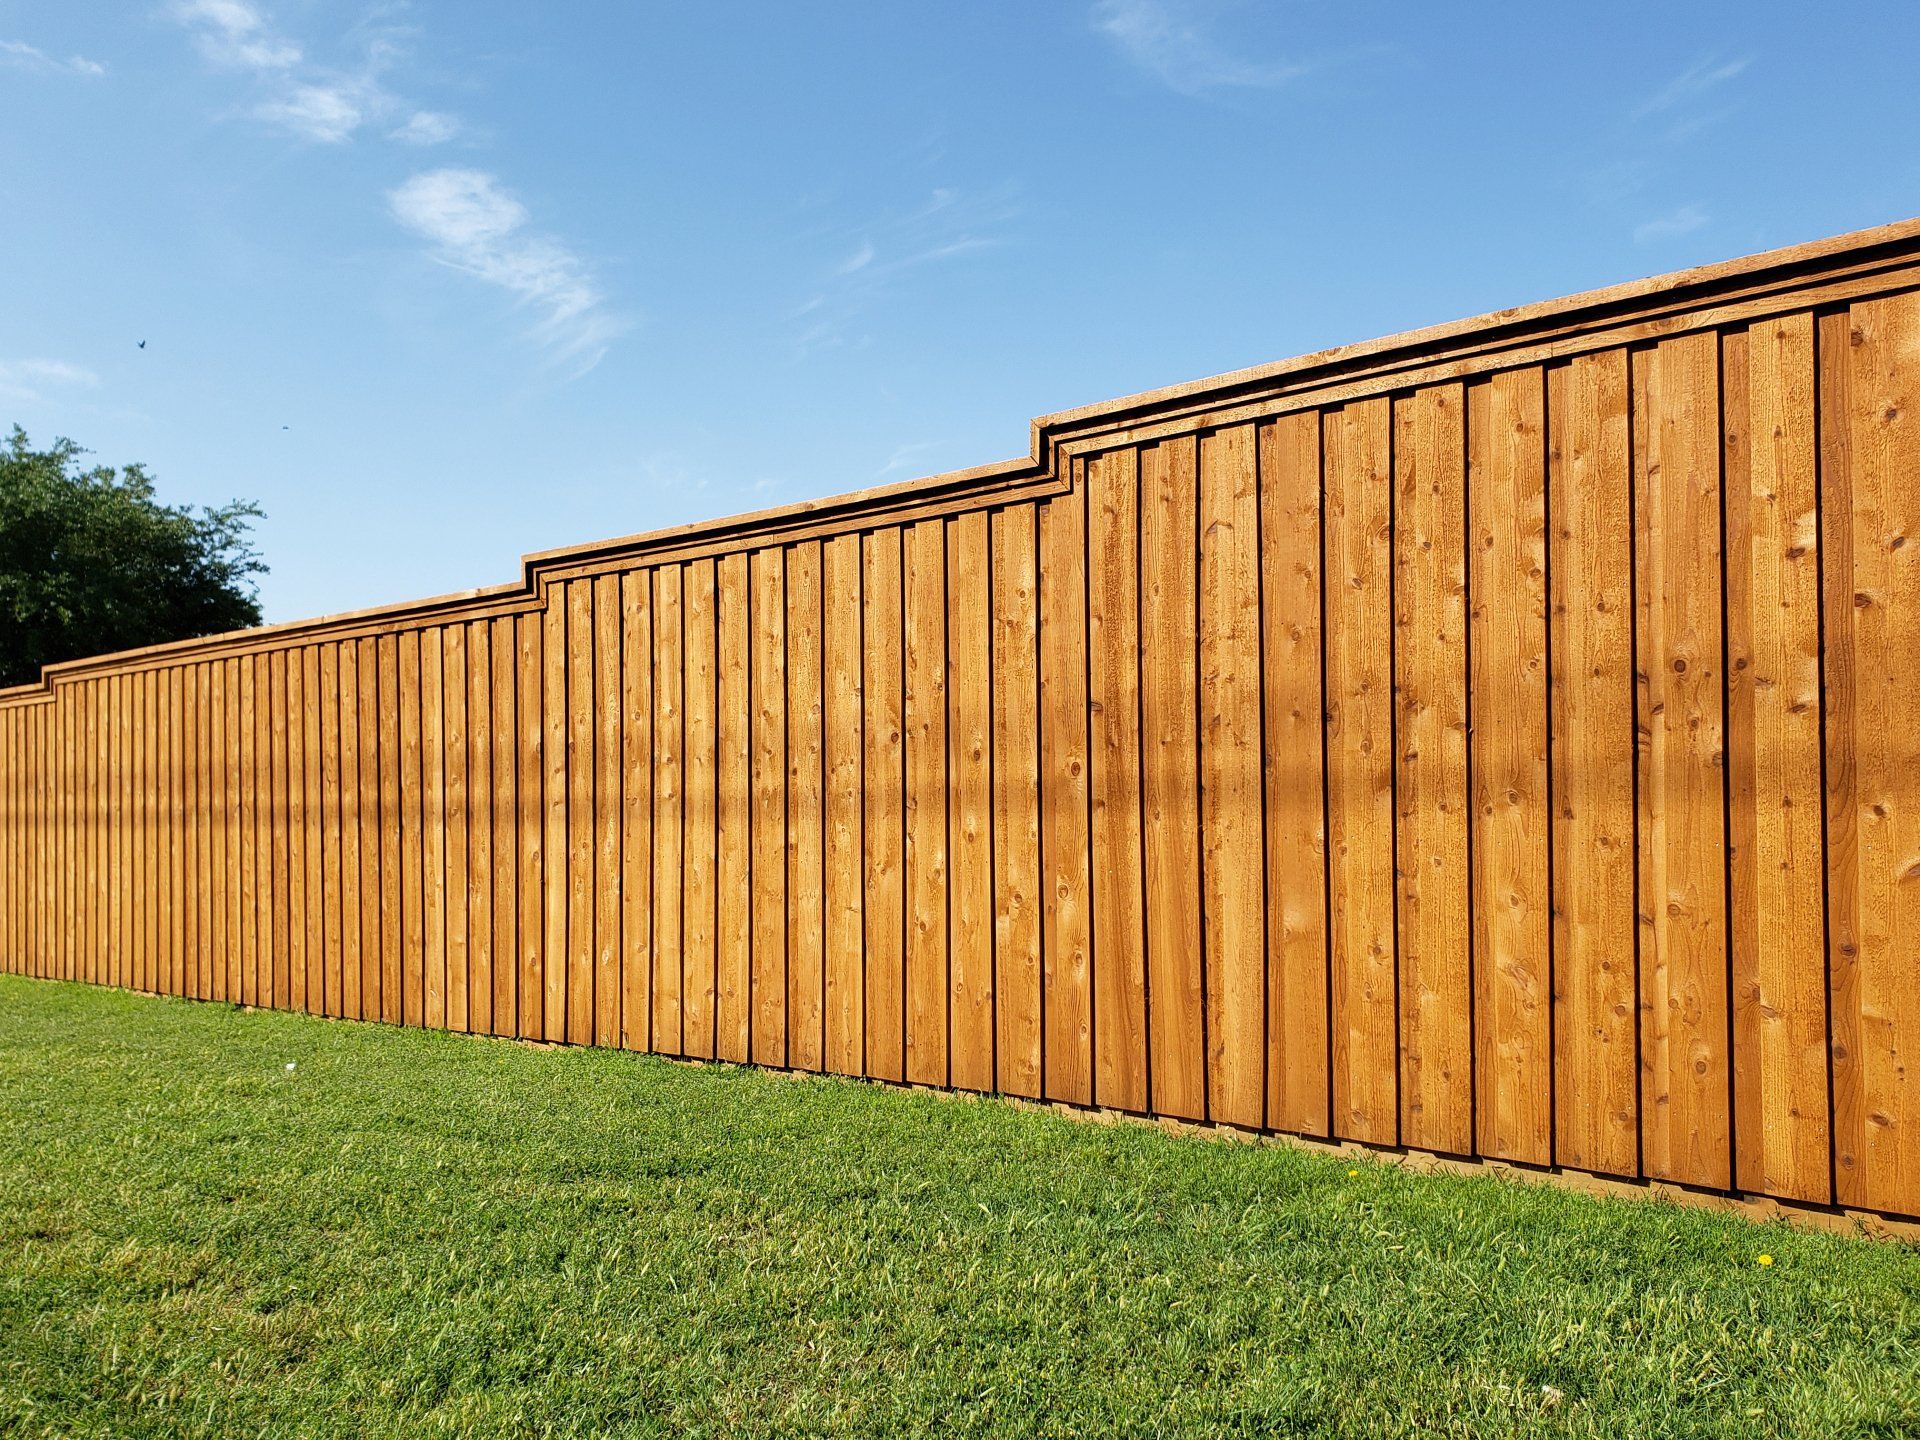 New wooden brown fence in community